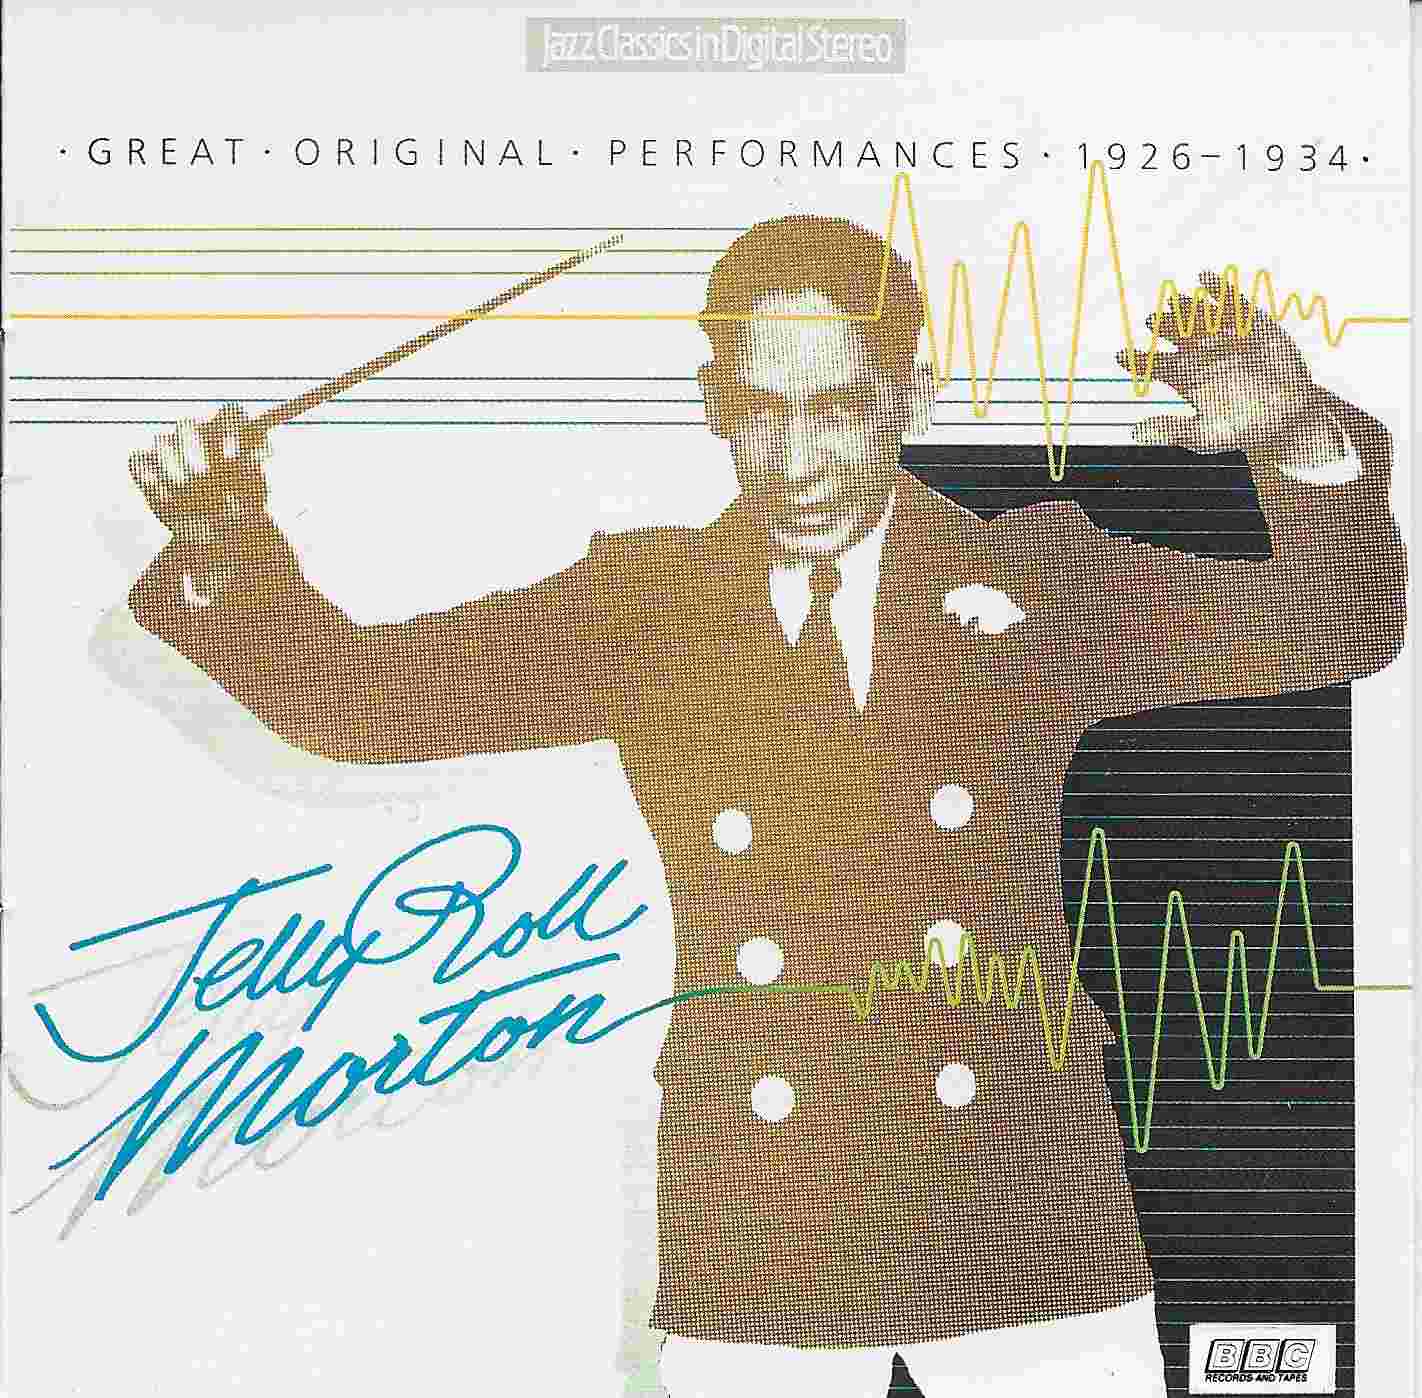 Picture of Jazz Classics - Jelly Roll Morton by artist Jelly Roll Morton from the BBC cds - Records and Tapes library